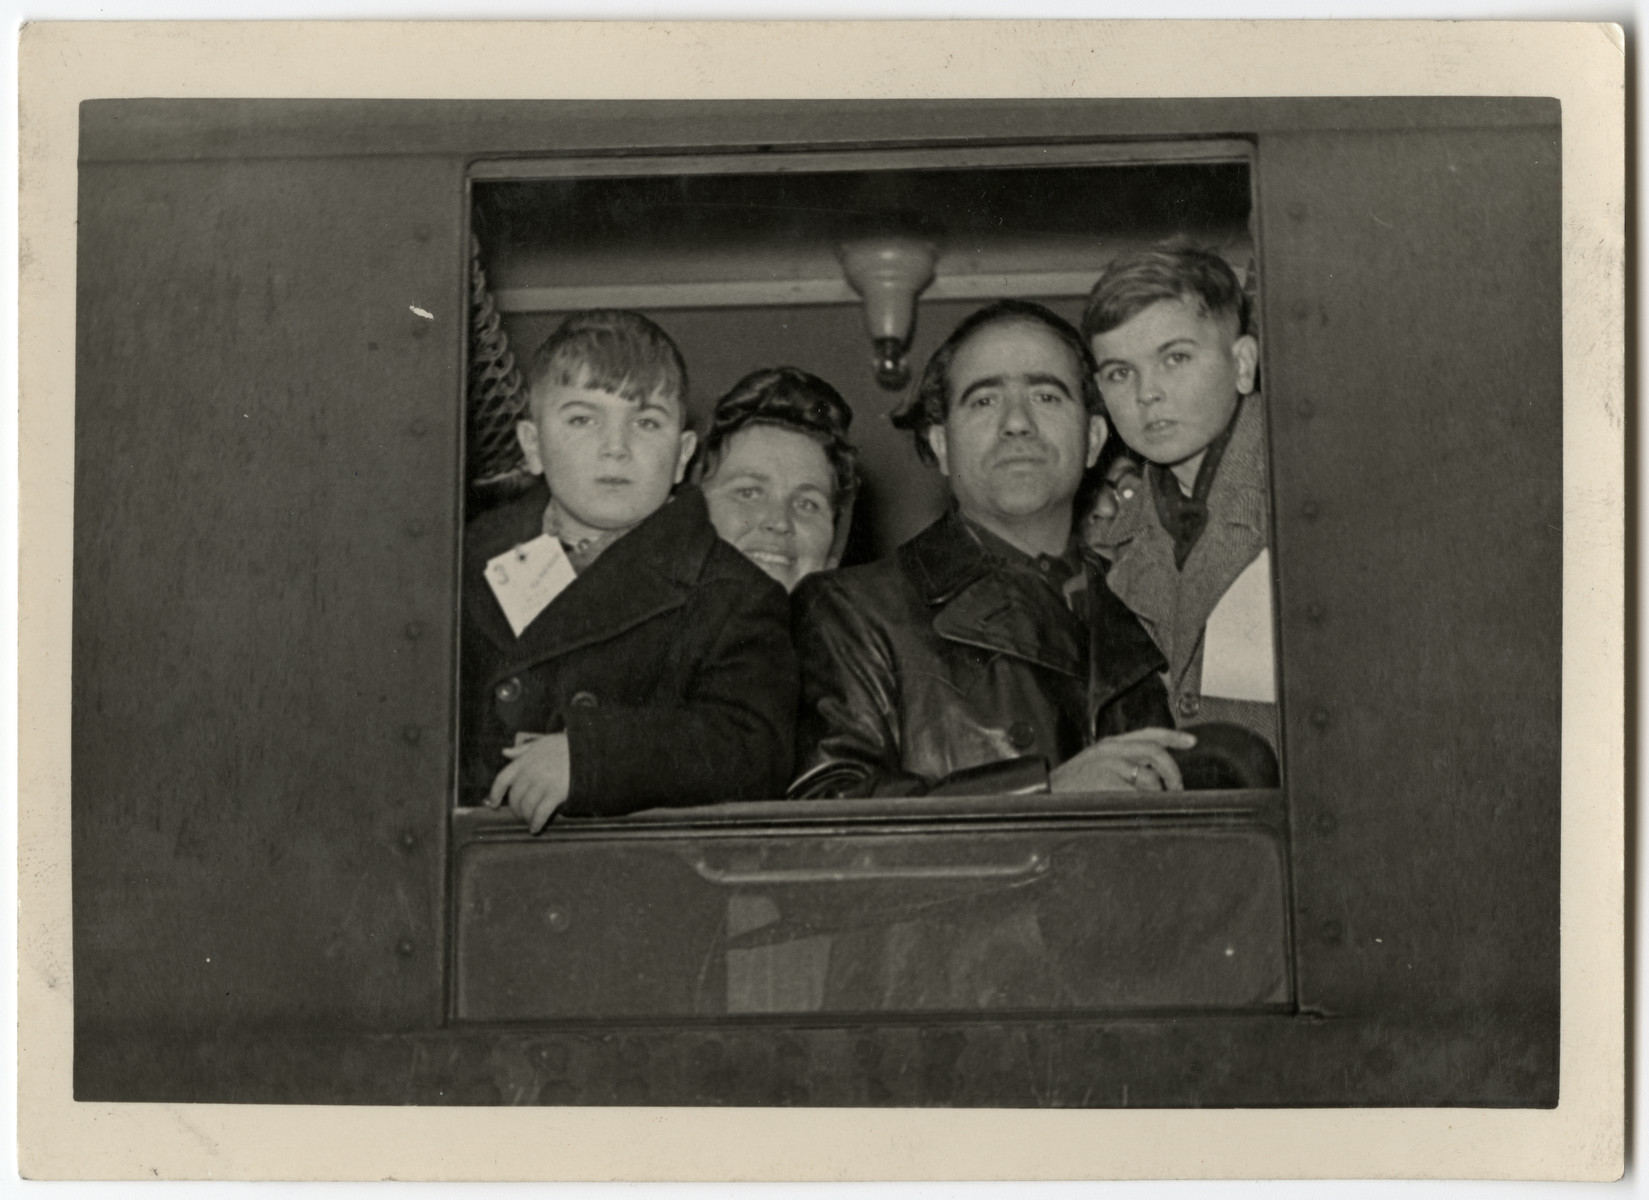 The Galicki family looks out a train window as they leave for the Bremerhaven harbor en route to the United States.

From left to right are Paul, Lydia, Noel and Albert.